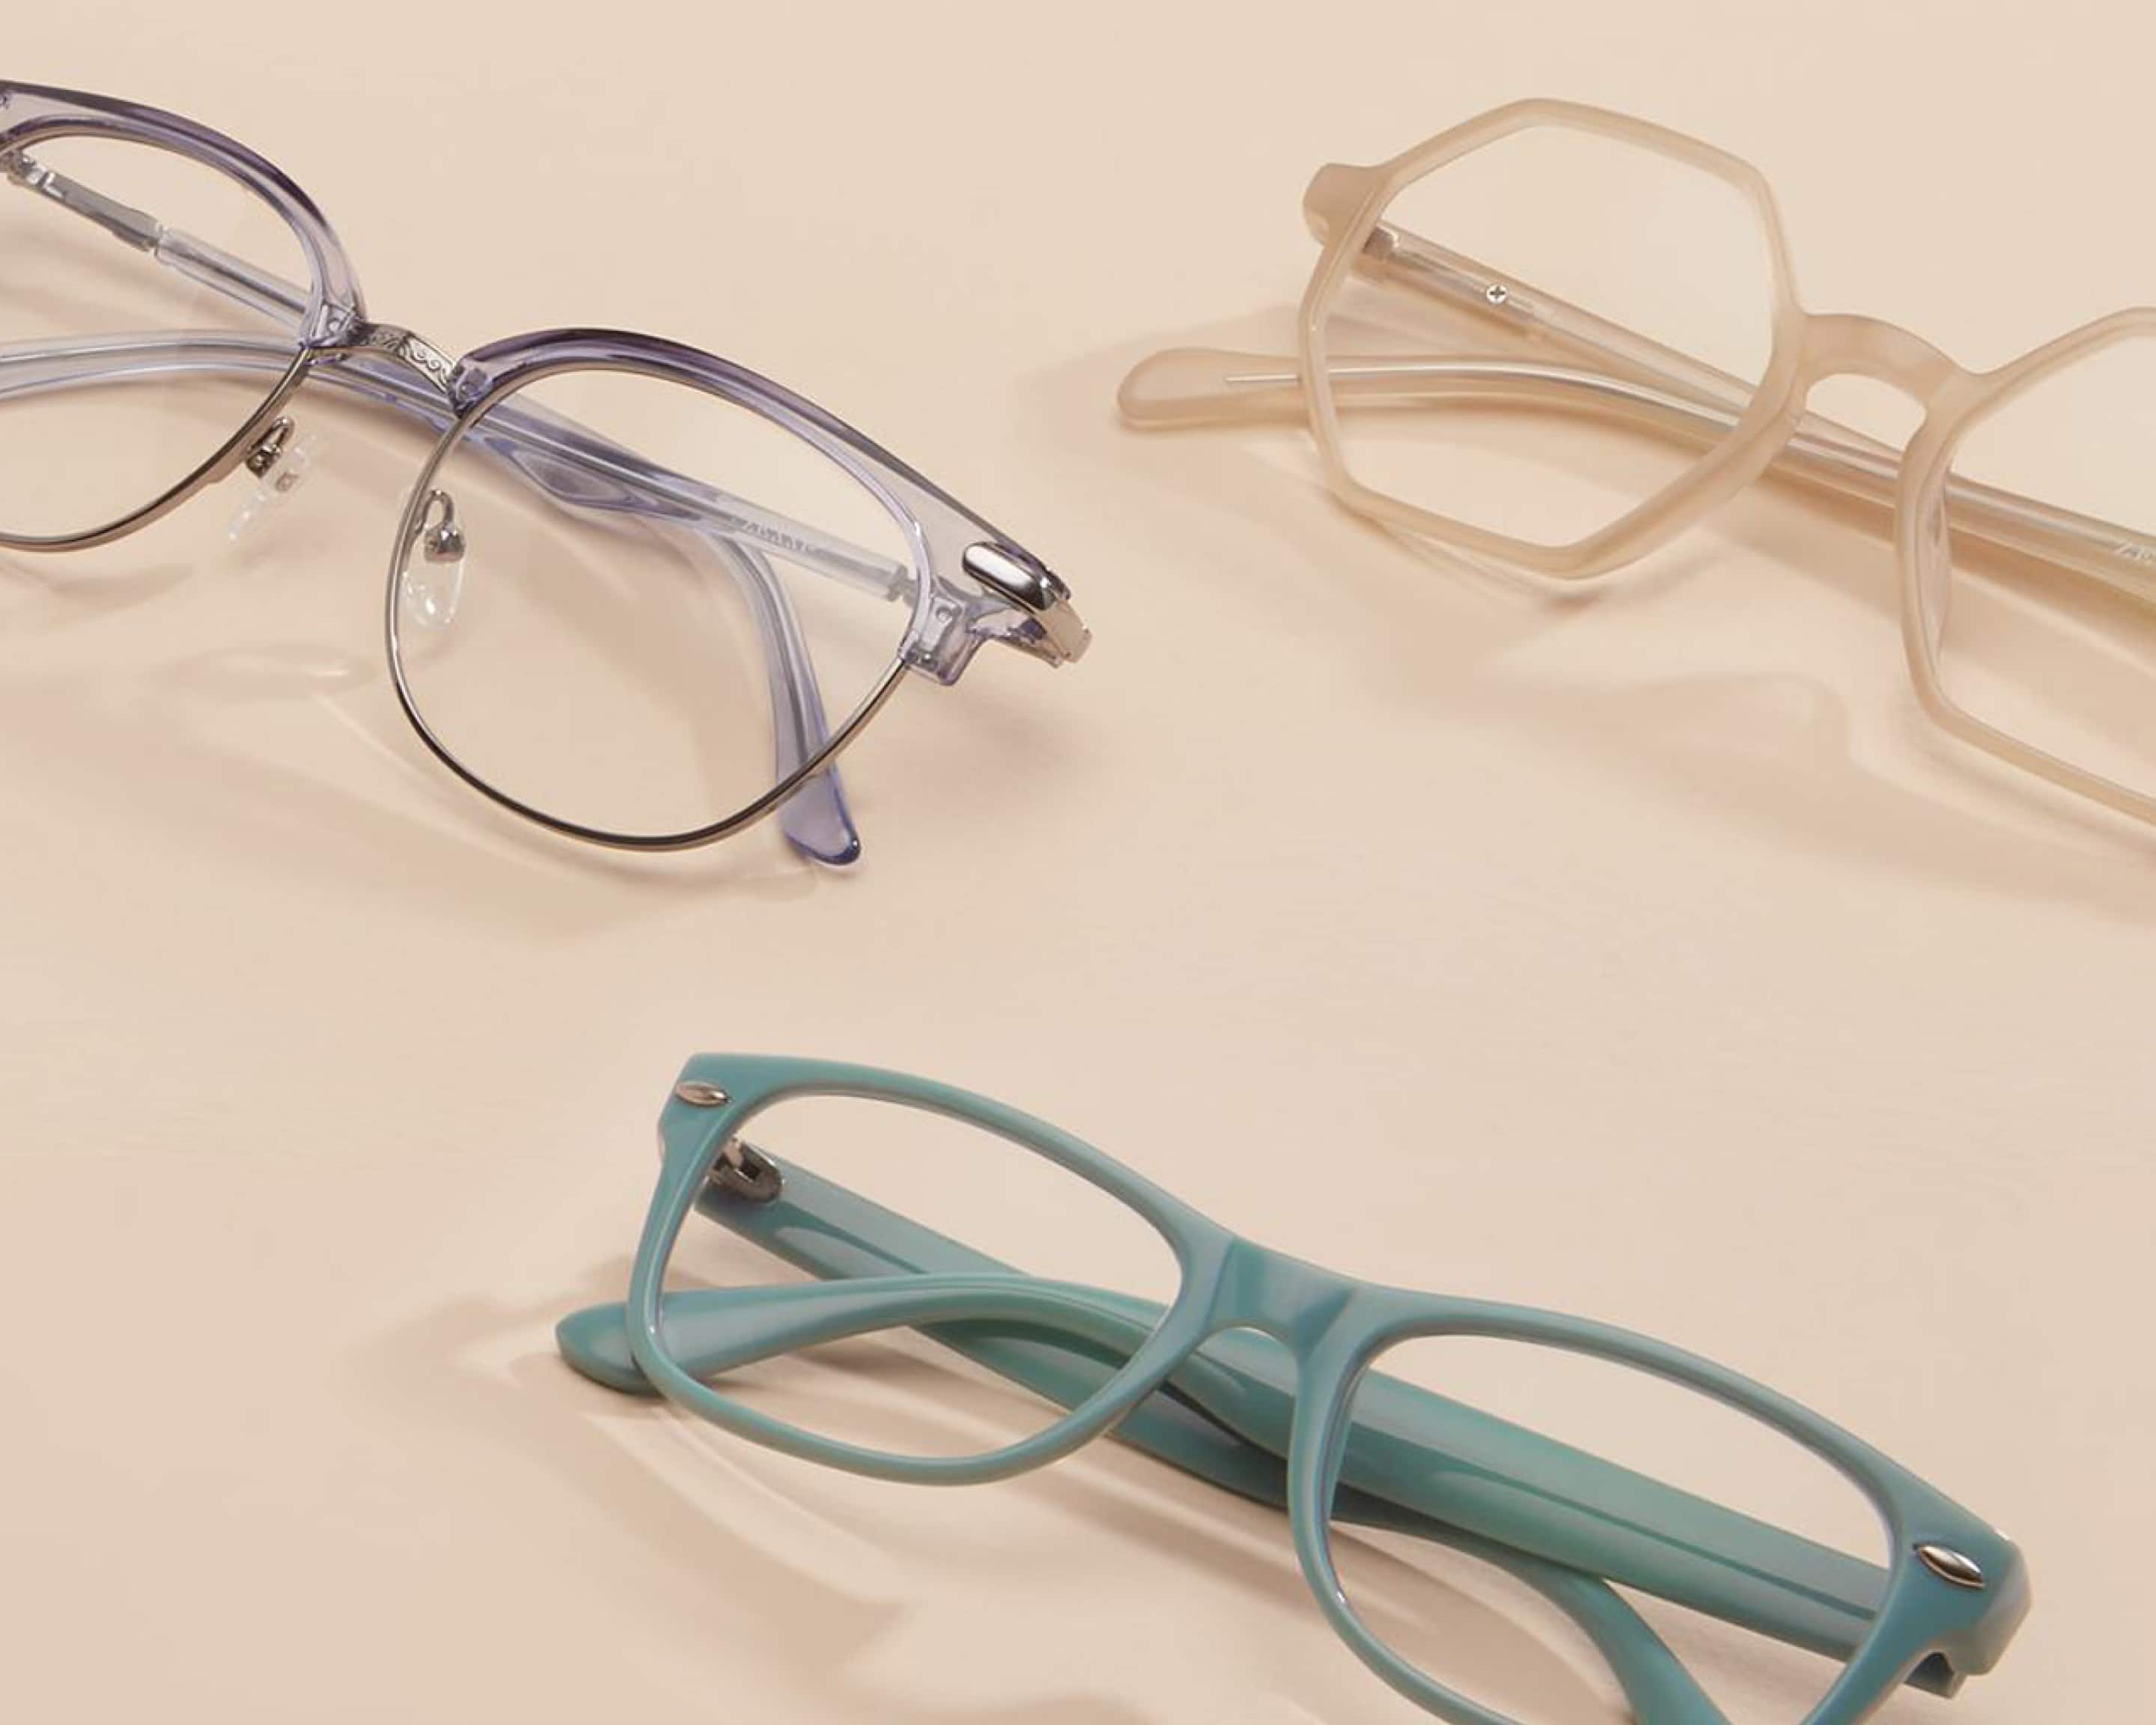 Image of three pairs of Zenni glasses against a beige-colored background.